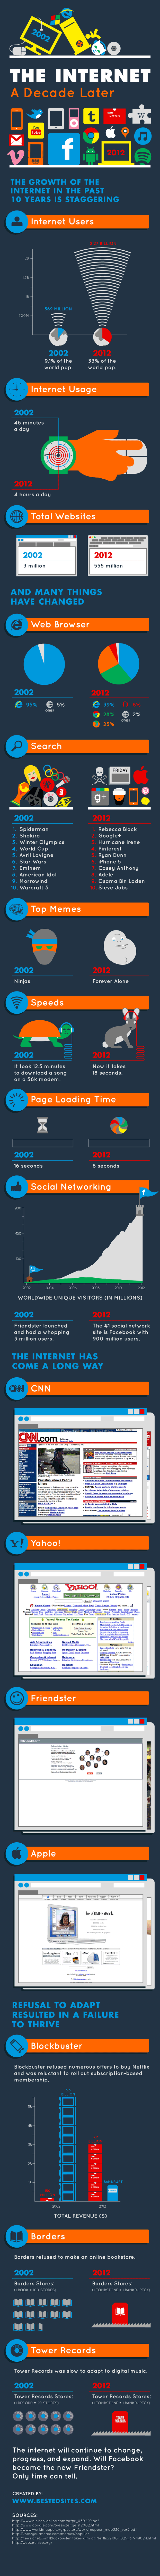 How the internet has changed in the last 10 years.